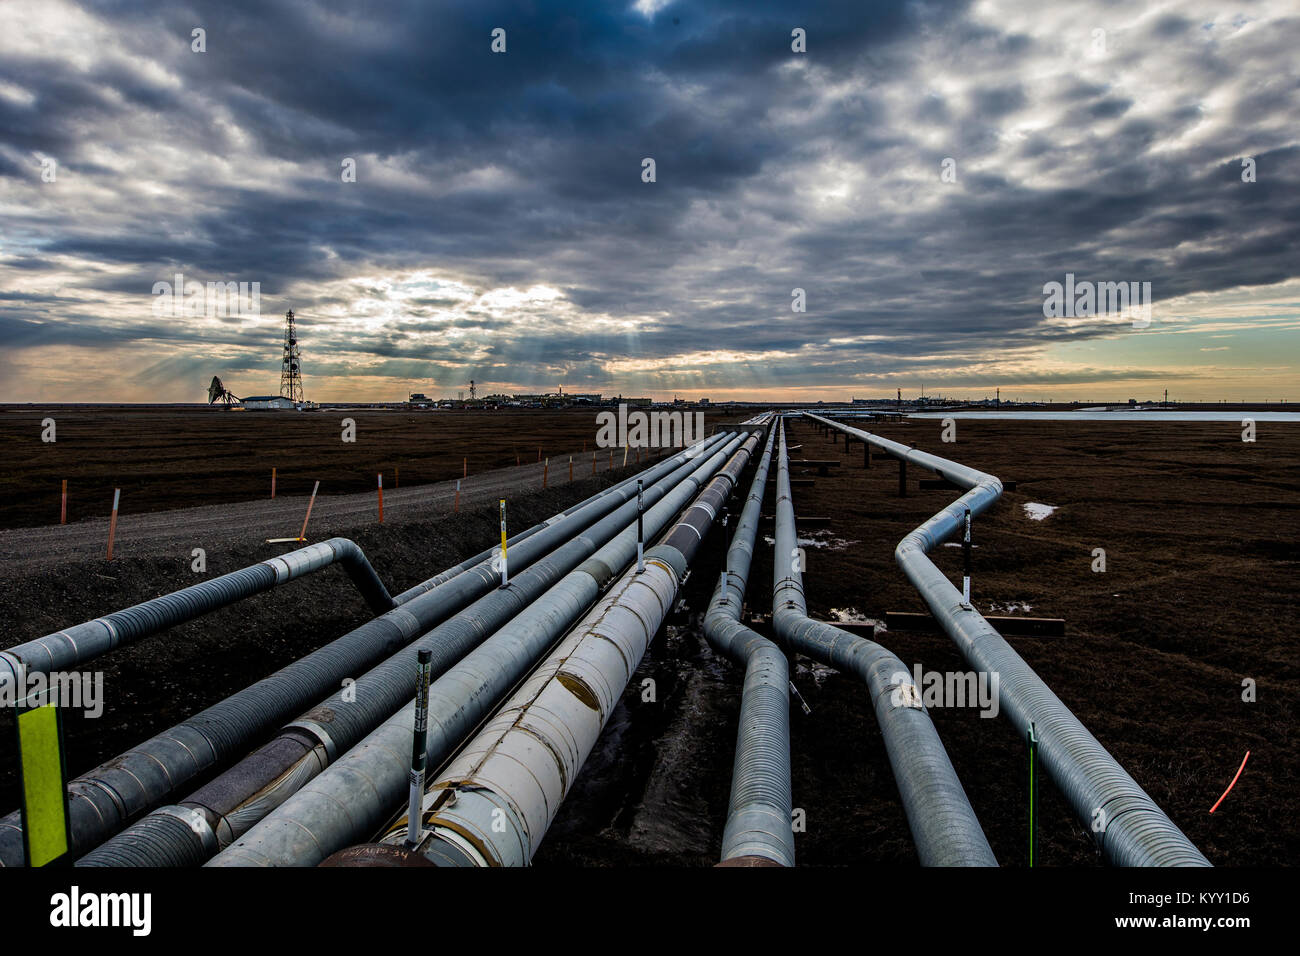 High angle view of Trans-Alaskan Pipeline against cloudy sky during sunset Stock Photo